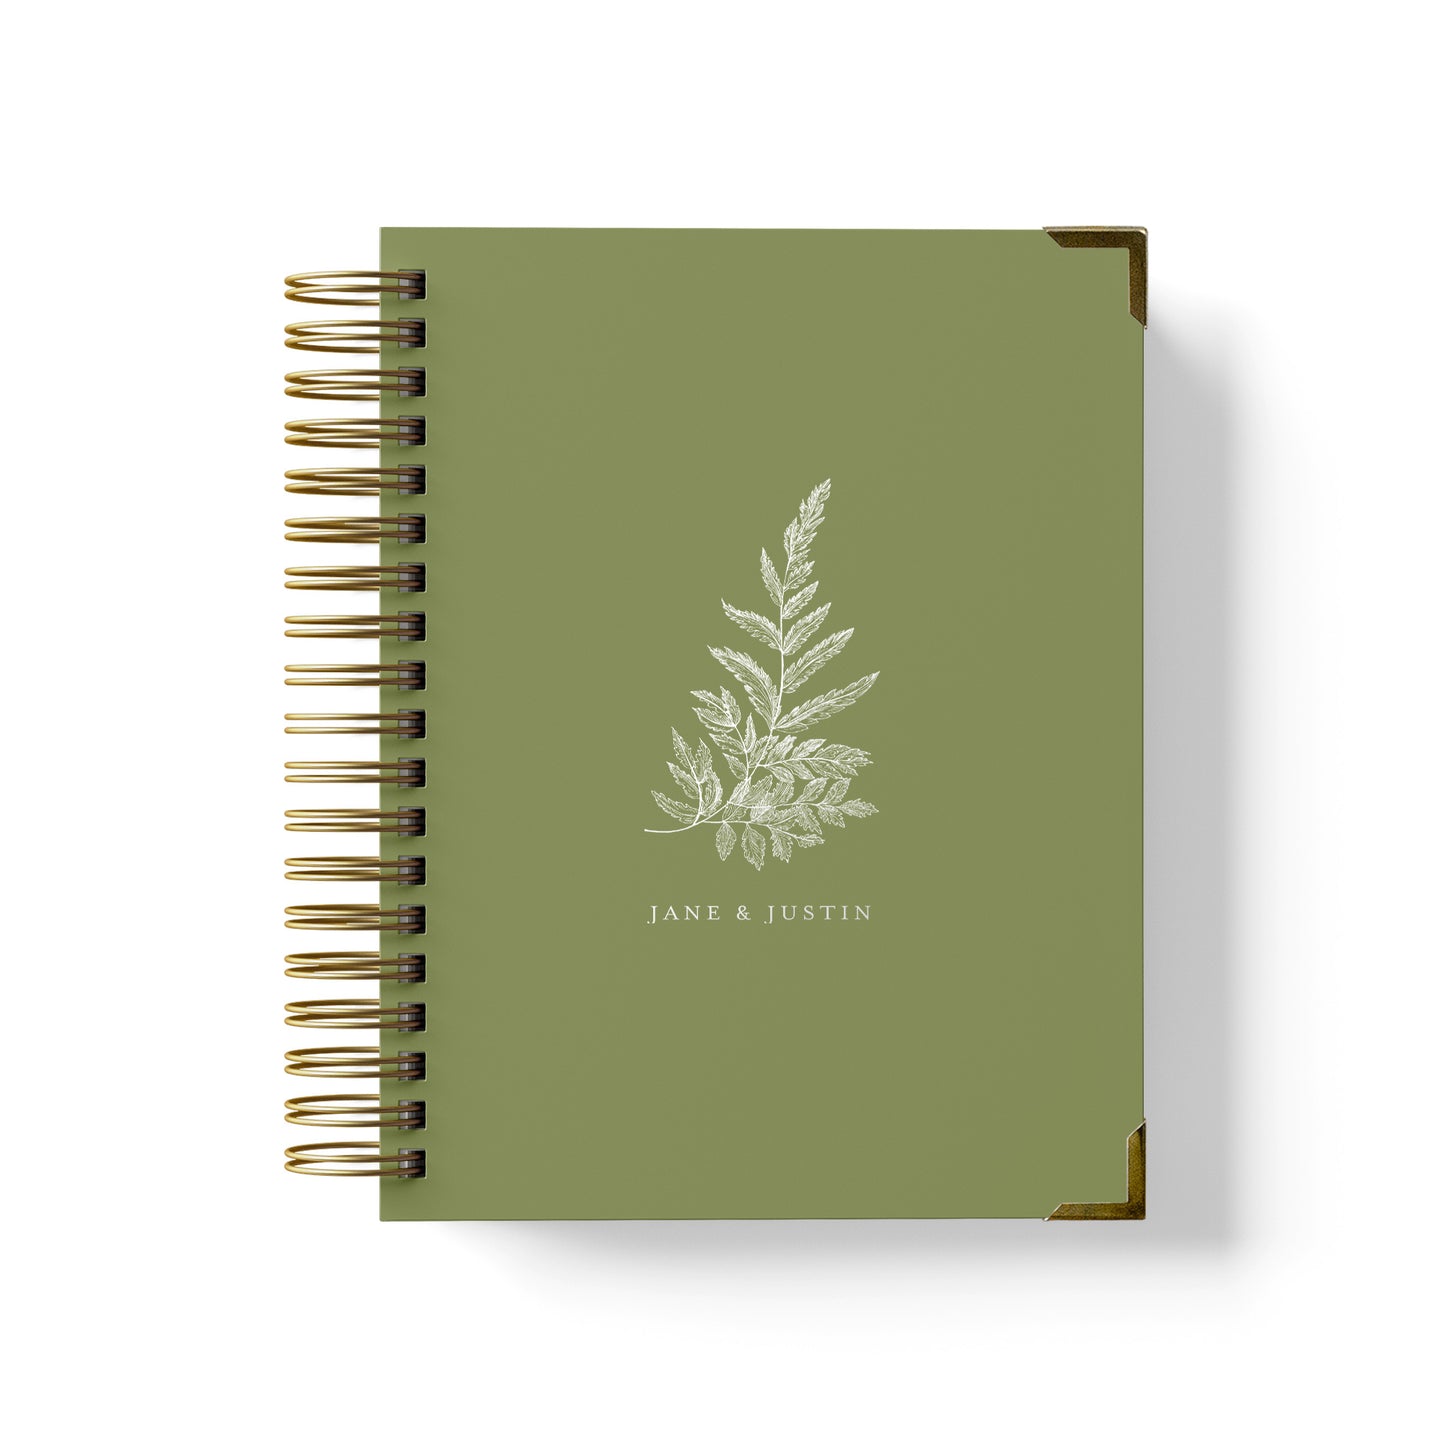 Our luxury wedding planner books are the best a bride can buy, featured in a botanical fern design